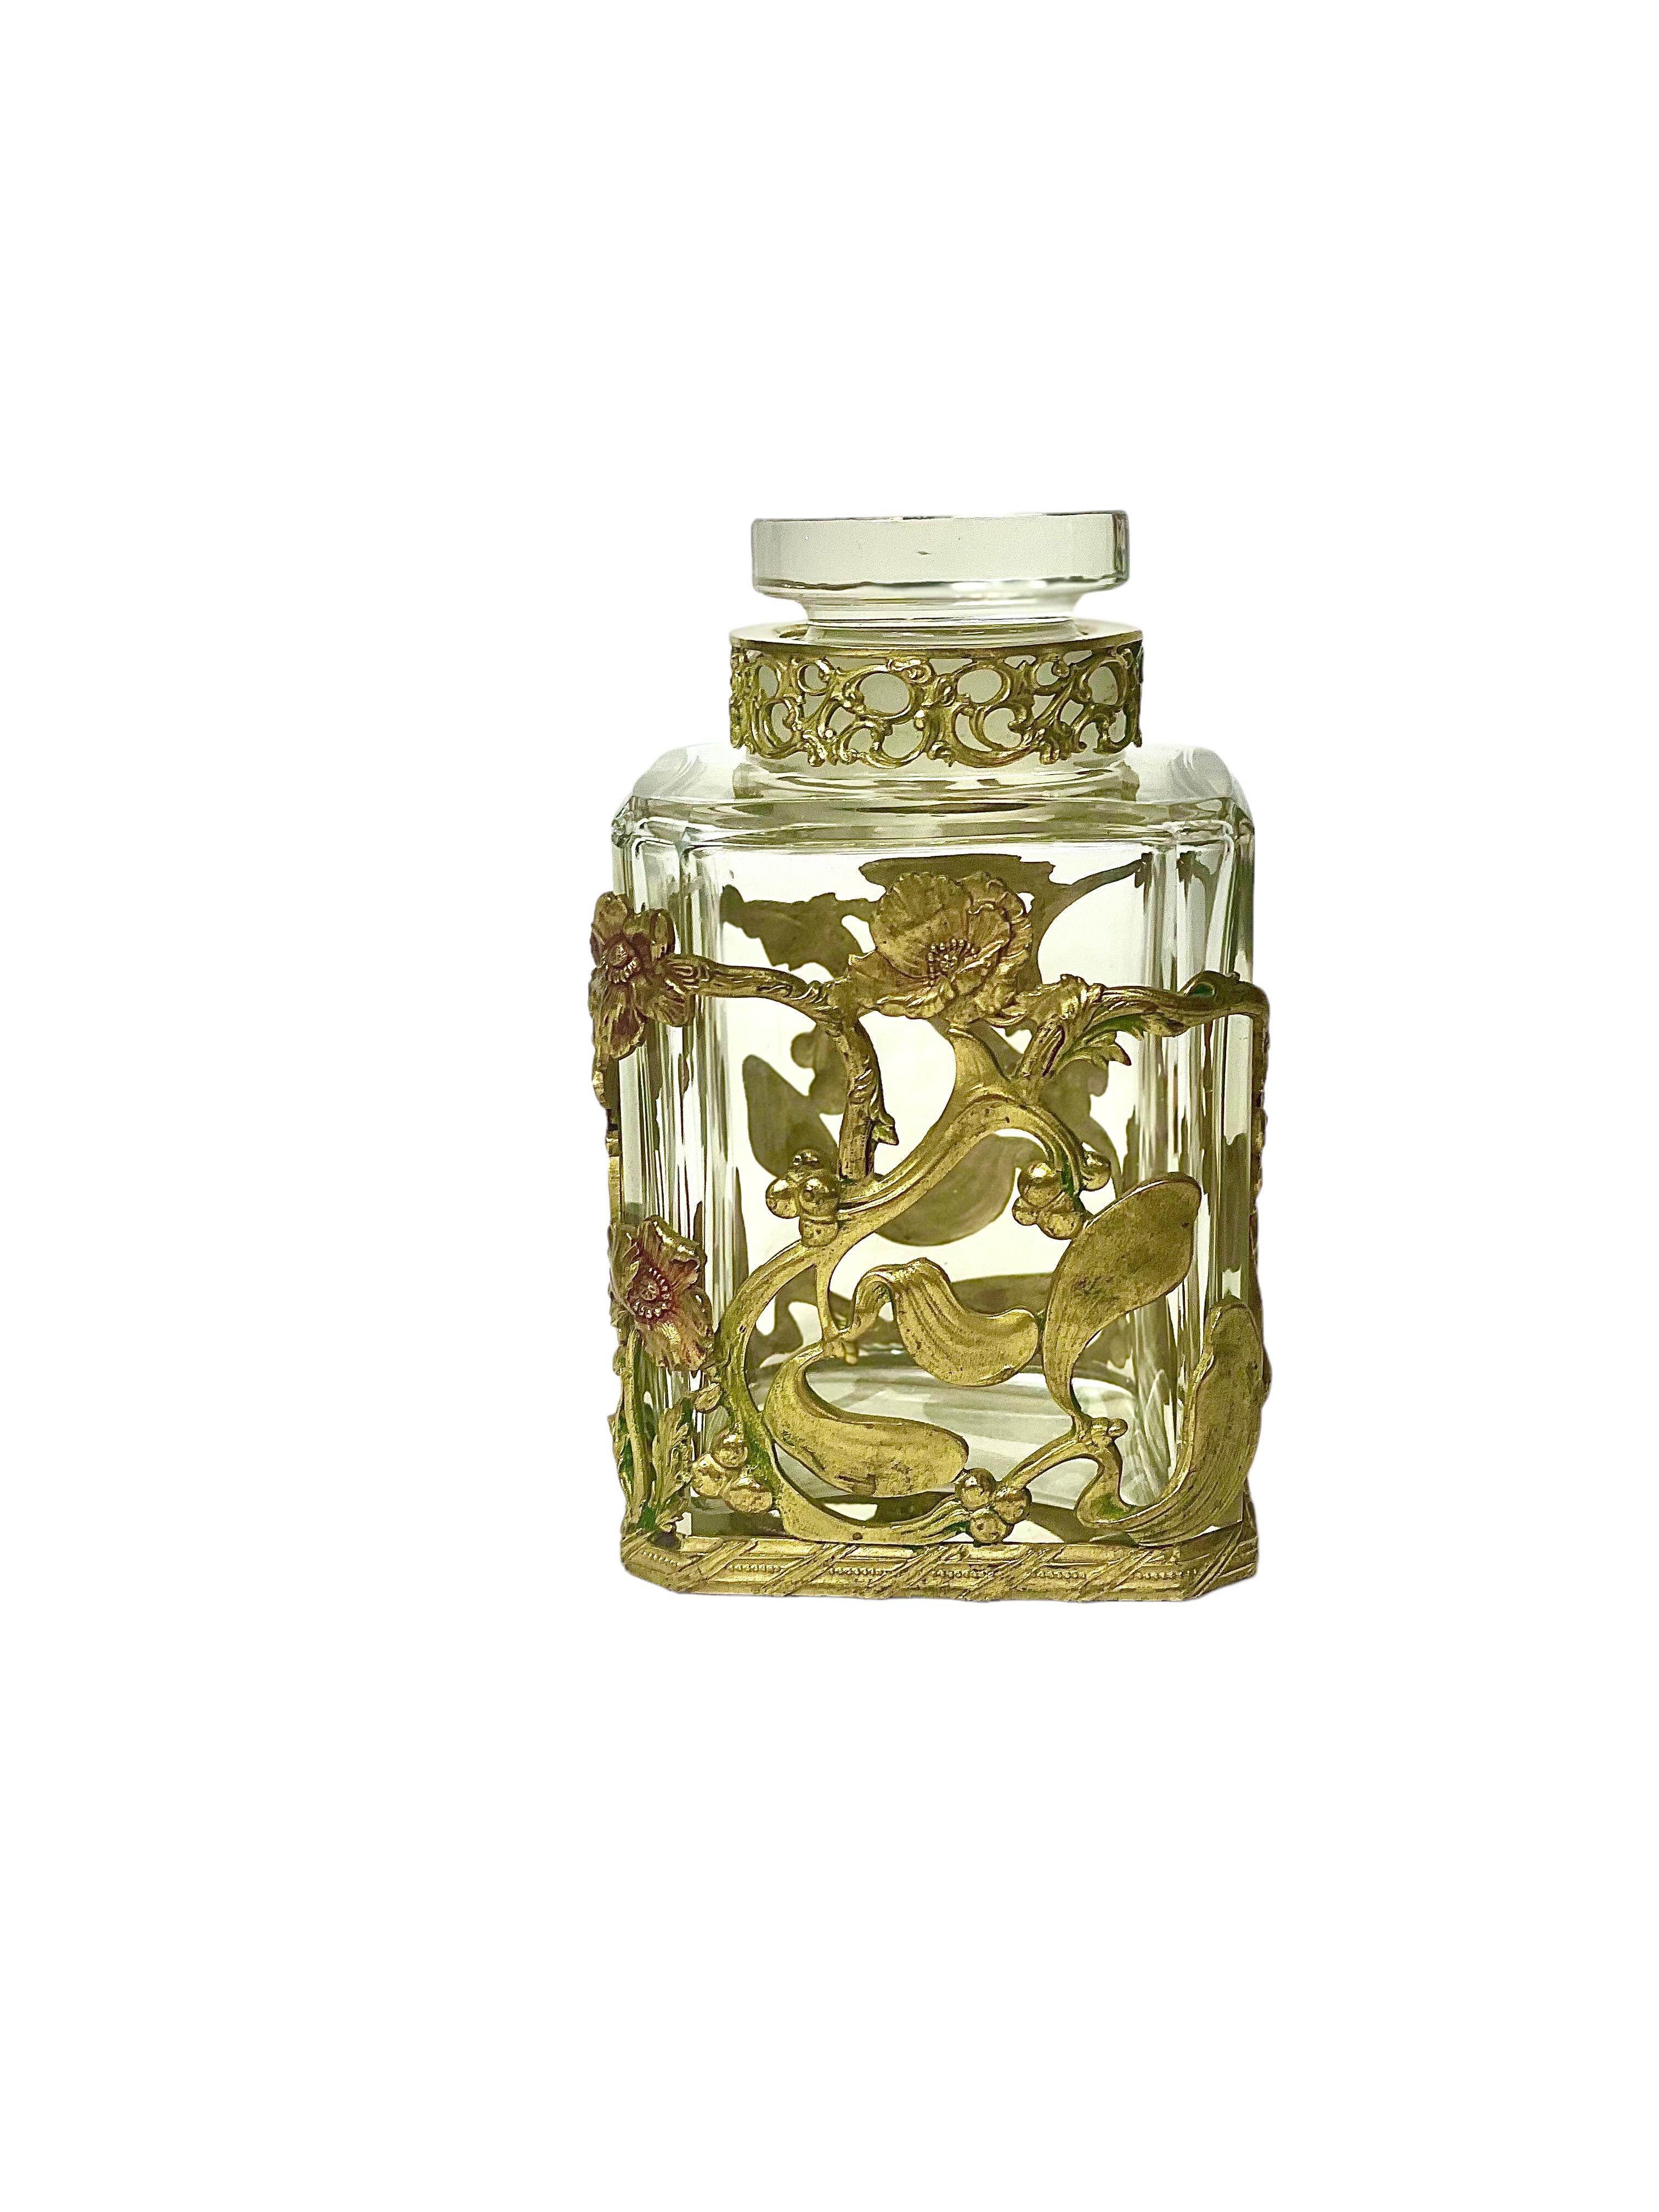 A pretty crystal, stoppered bottle, intricately clad in an openwork gilt-brass motif of entwined poppies and mistletoe. This square-sided Art Nouveau period bottle features a simple, but elegant flattened, cylindrical crystal stopper. There is a